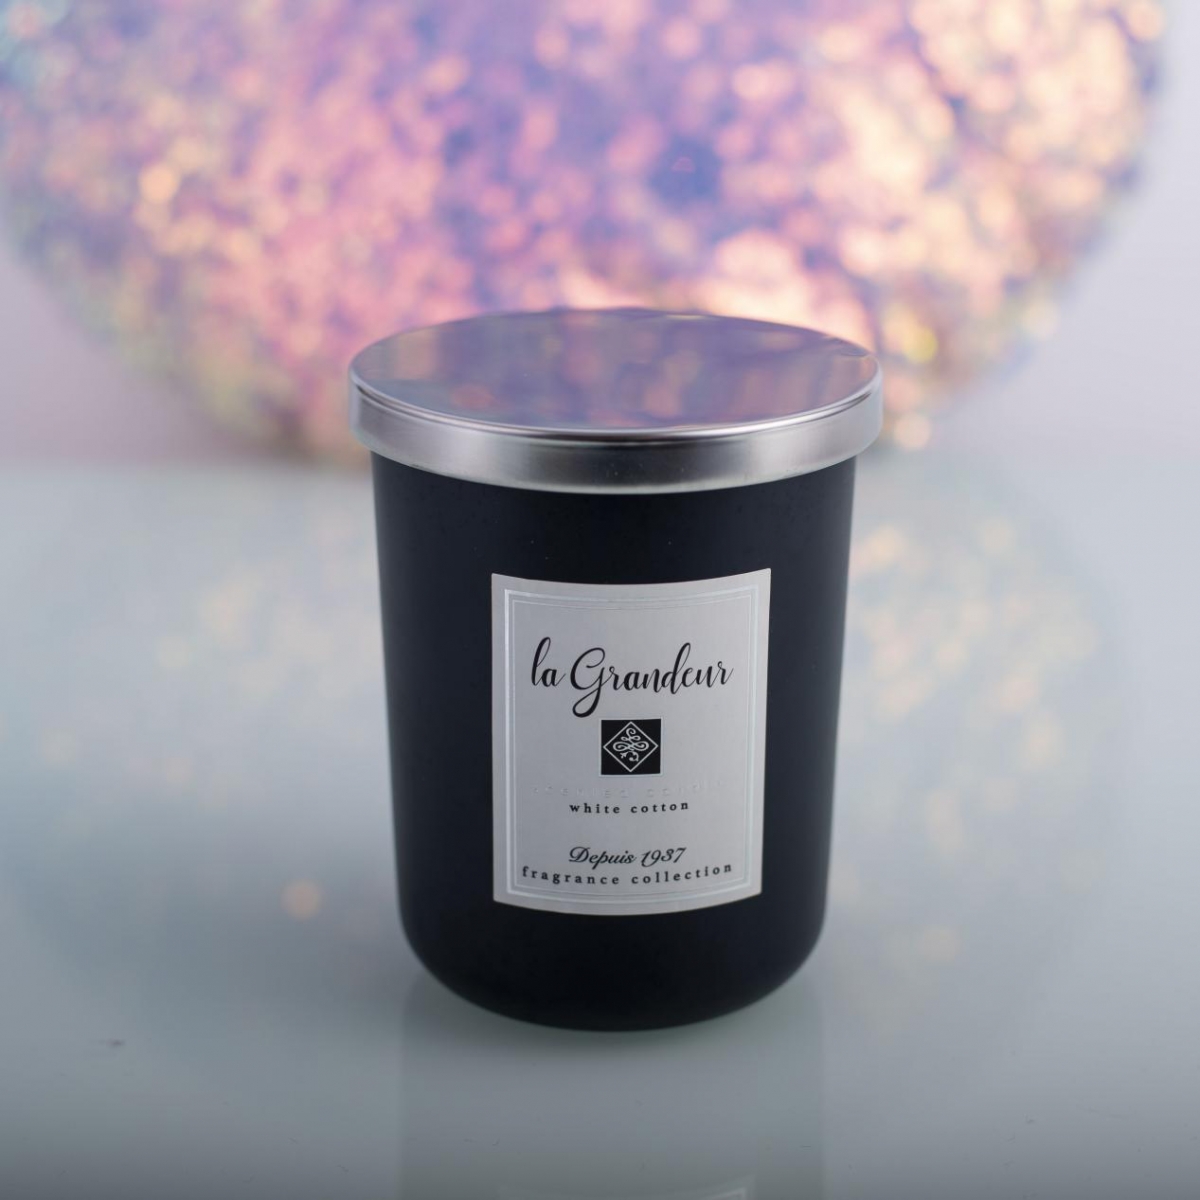 Scented Candles : White Cotton , Matte Black Candle Jar ,China Factory , Cheap Price-HOWCANDLE-Candles,Scented Candles,Aromatherapy Candles,Soy Candles,Vegan Candles,Jar Candles,Pillar Candles,Candle Gift Sets,Essential Oils,Reed Diffuser,Candle Holder,